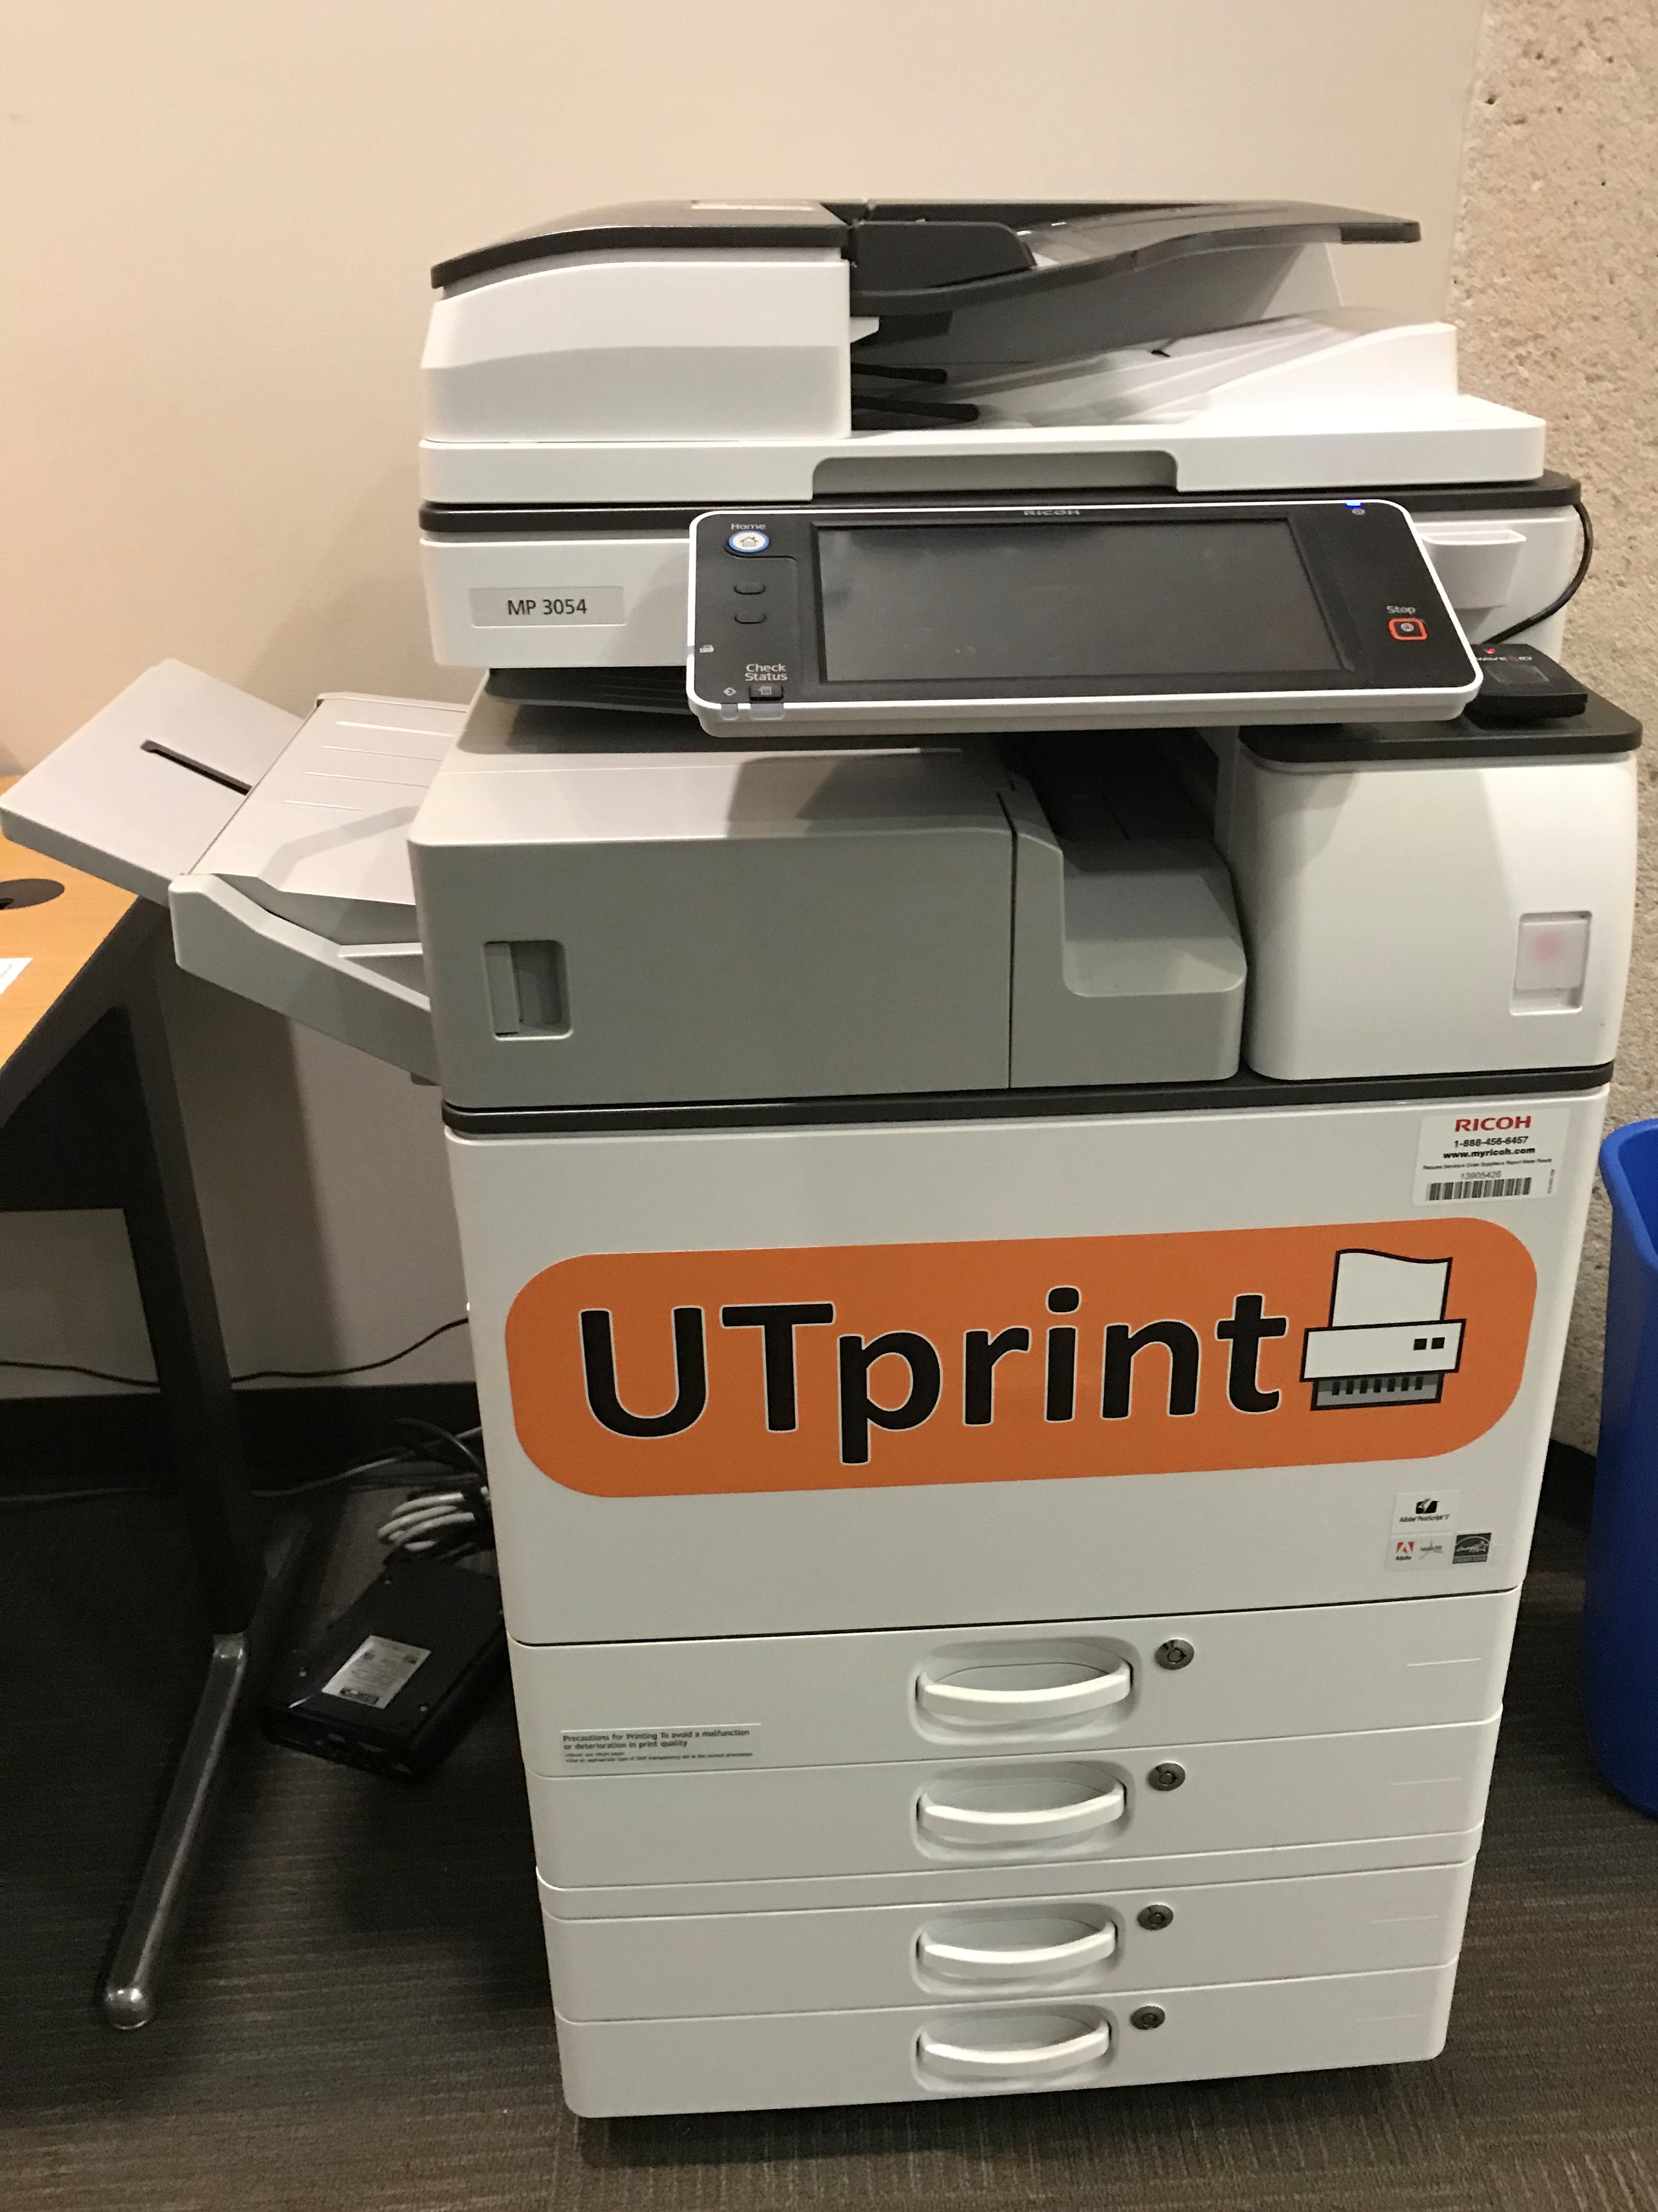 How Print, & Scan - How to Print, Copy, & Scan Law Library at Tarlton Law Library